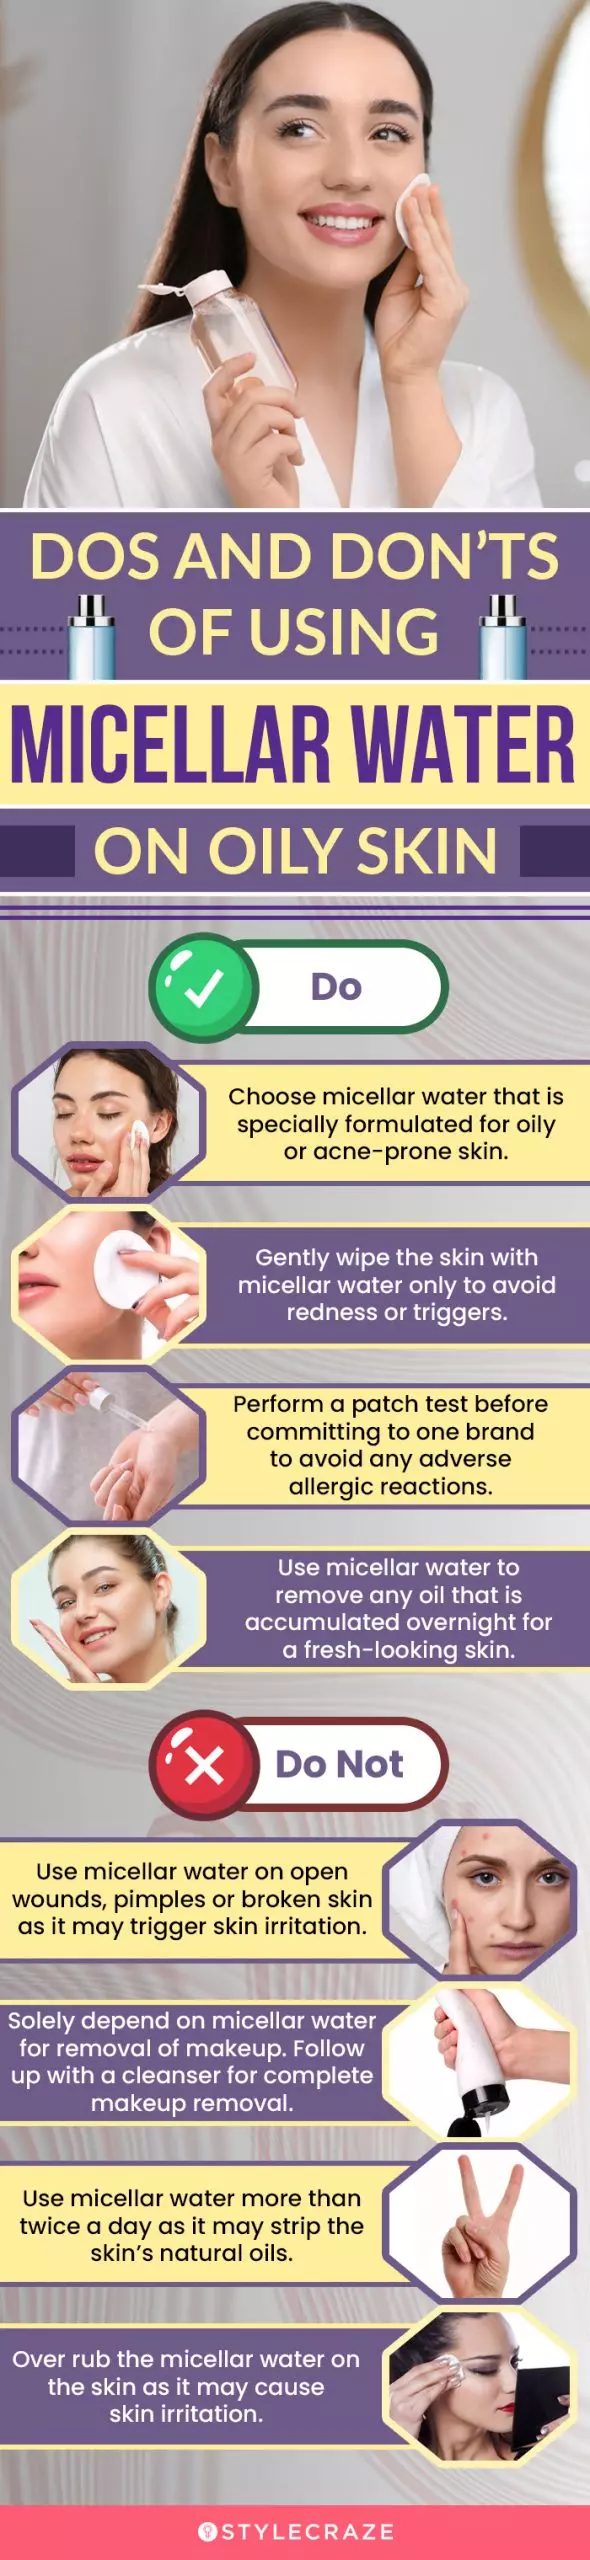 Dos And Don’ts Of Using Micellar Water On Oily Skin (infographic)